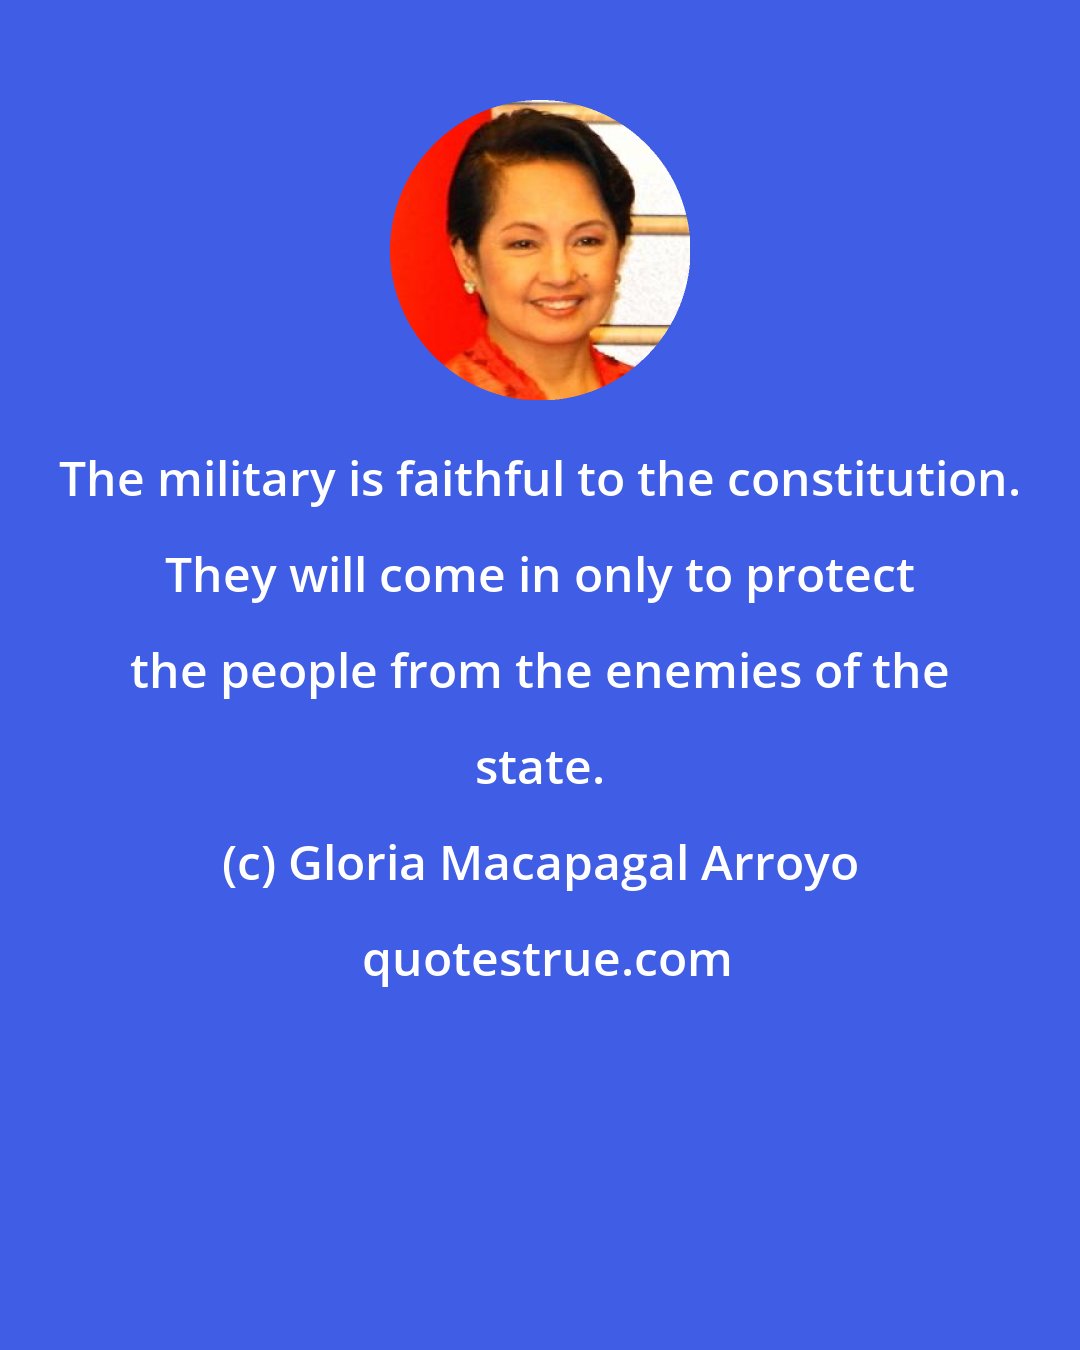 Gloria Macapagal Arroyo: The military is faithful to the constitution. They will come in only to protect the people from the enemies of the state.